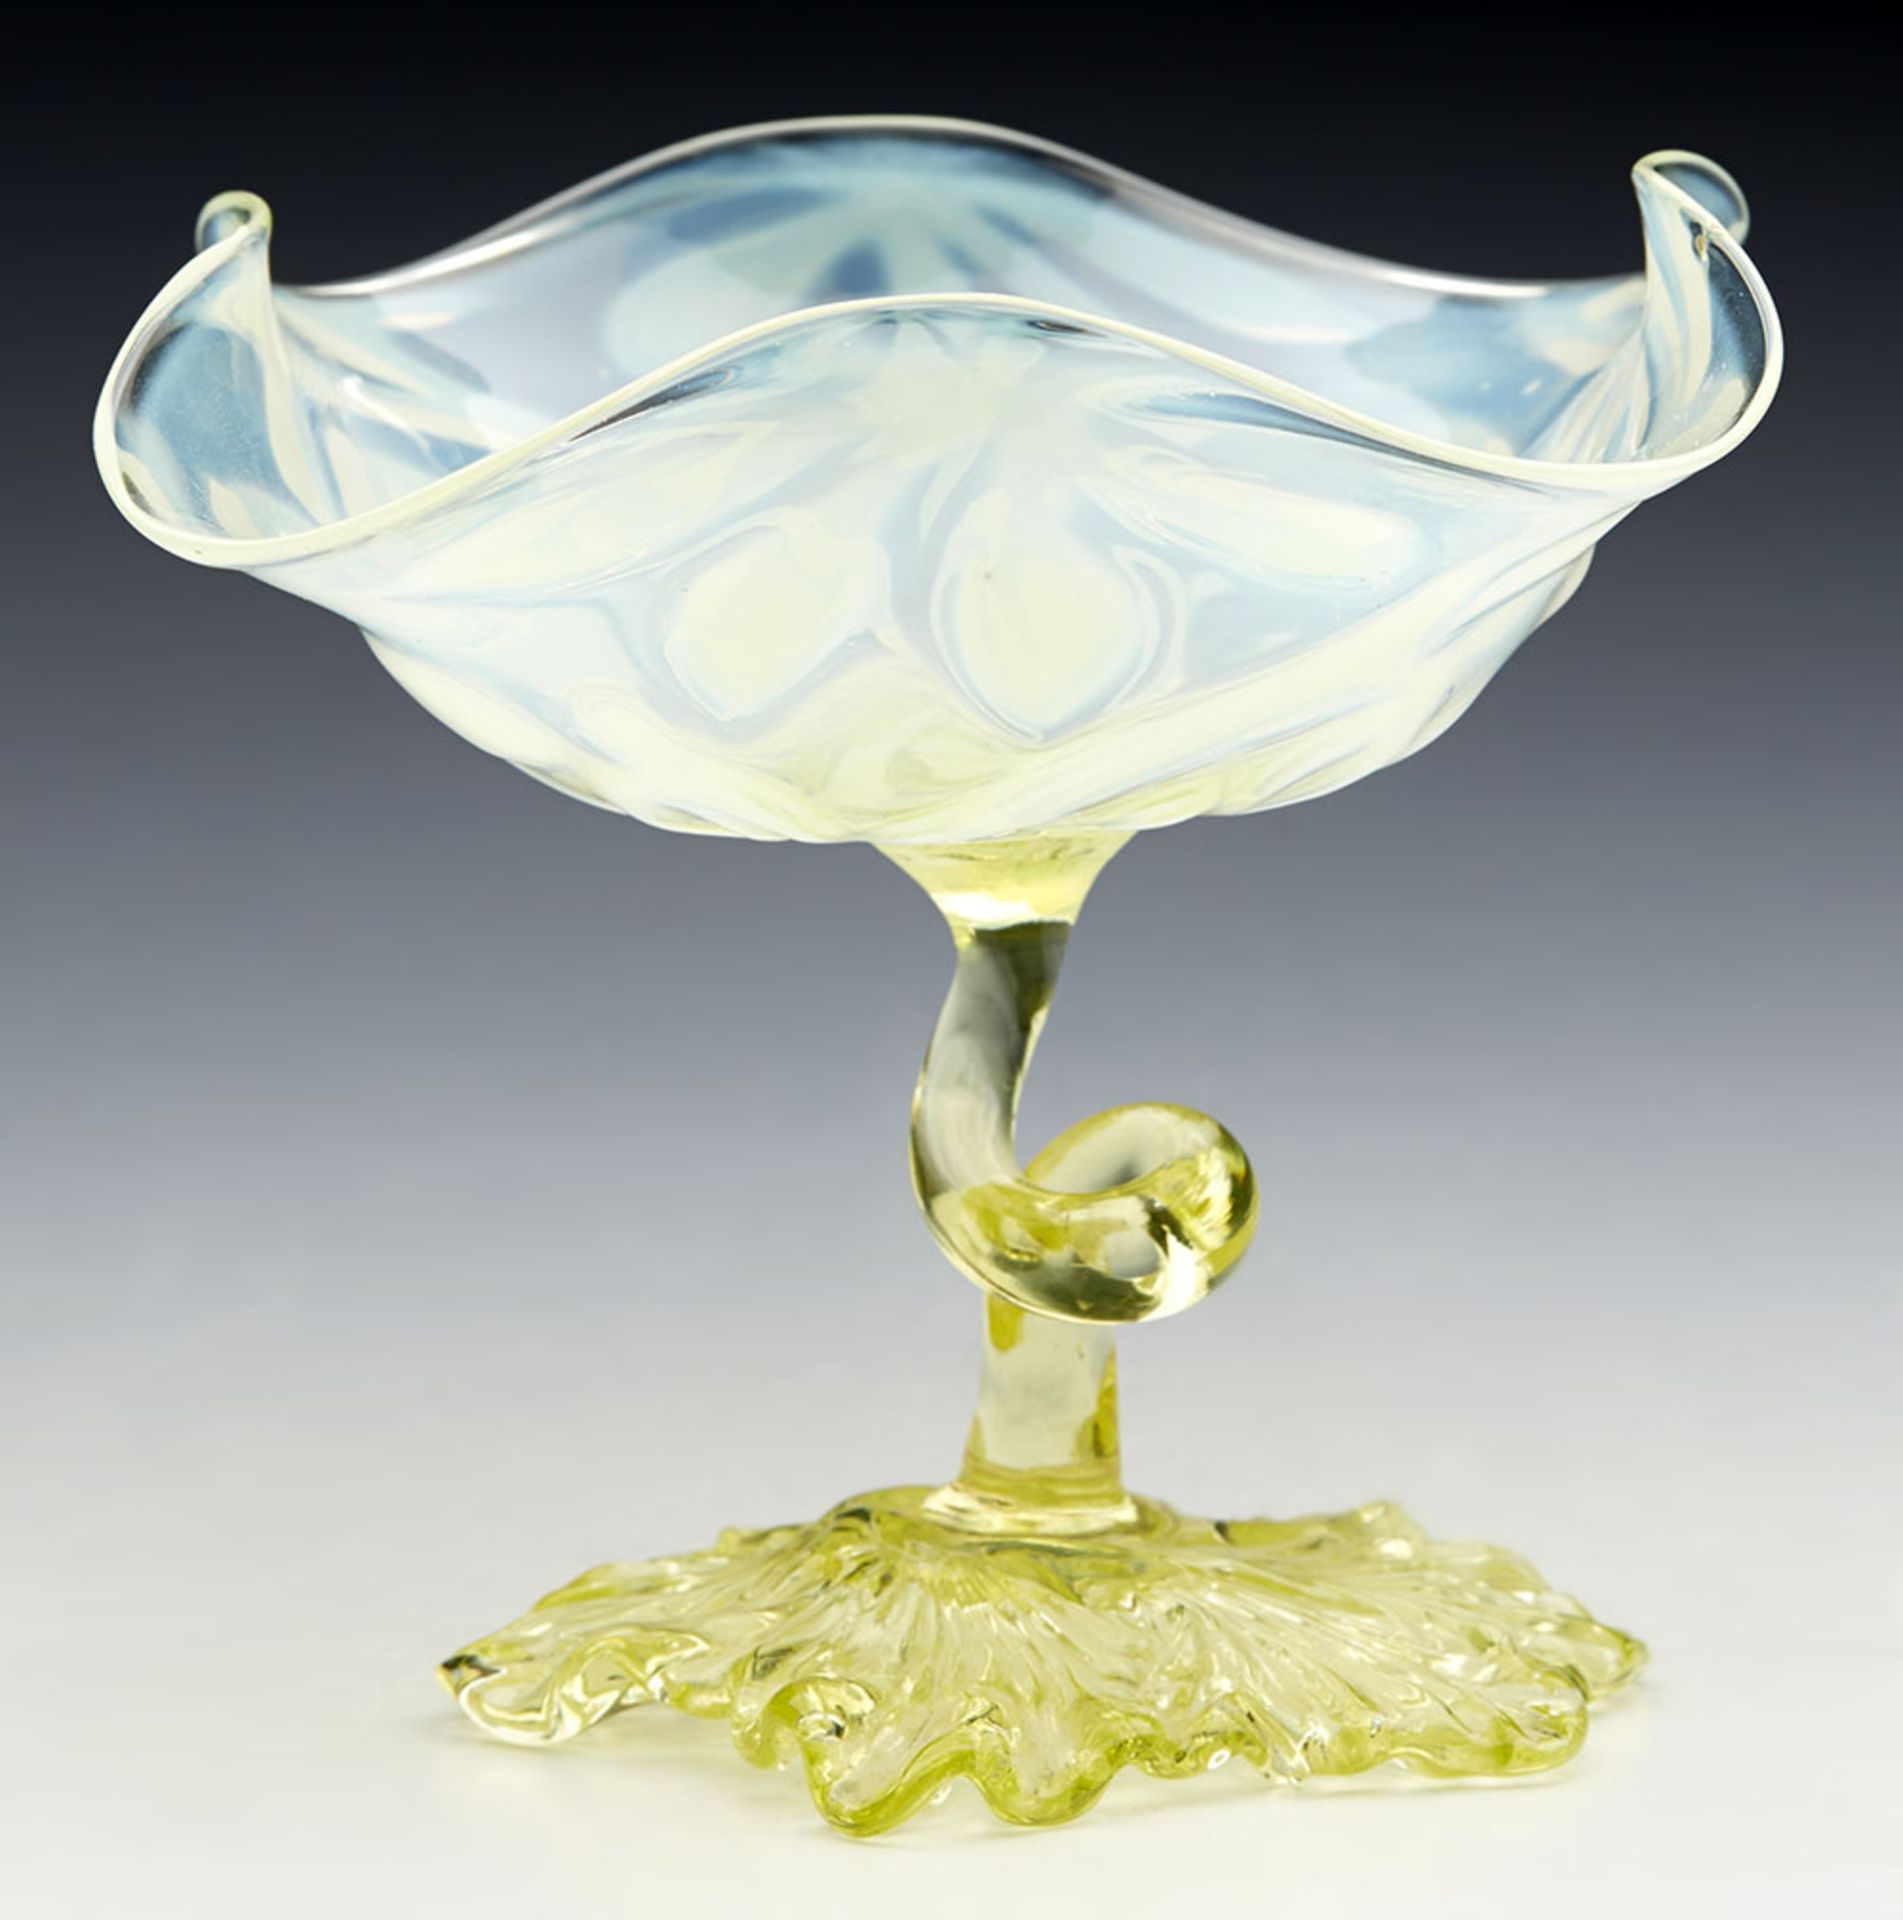 Antique English Yellow Vaseline Glass Stem Dish With Floral Designs C.1890 - Image 5 of 9